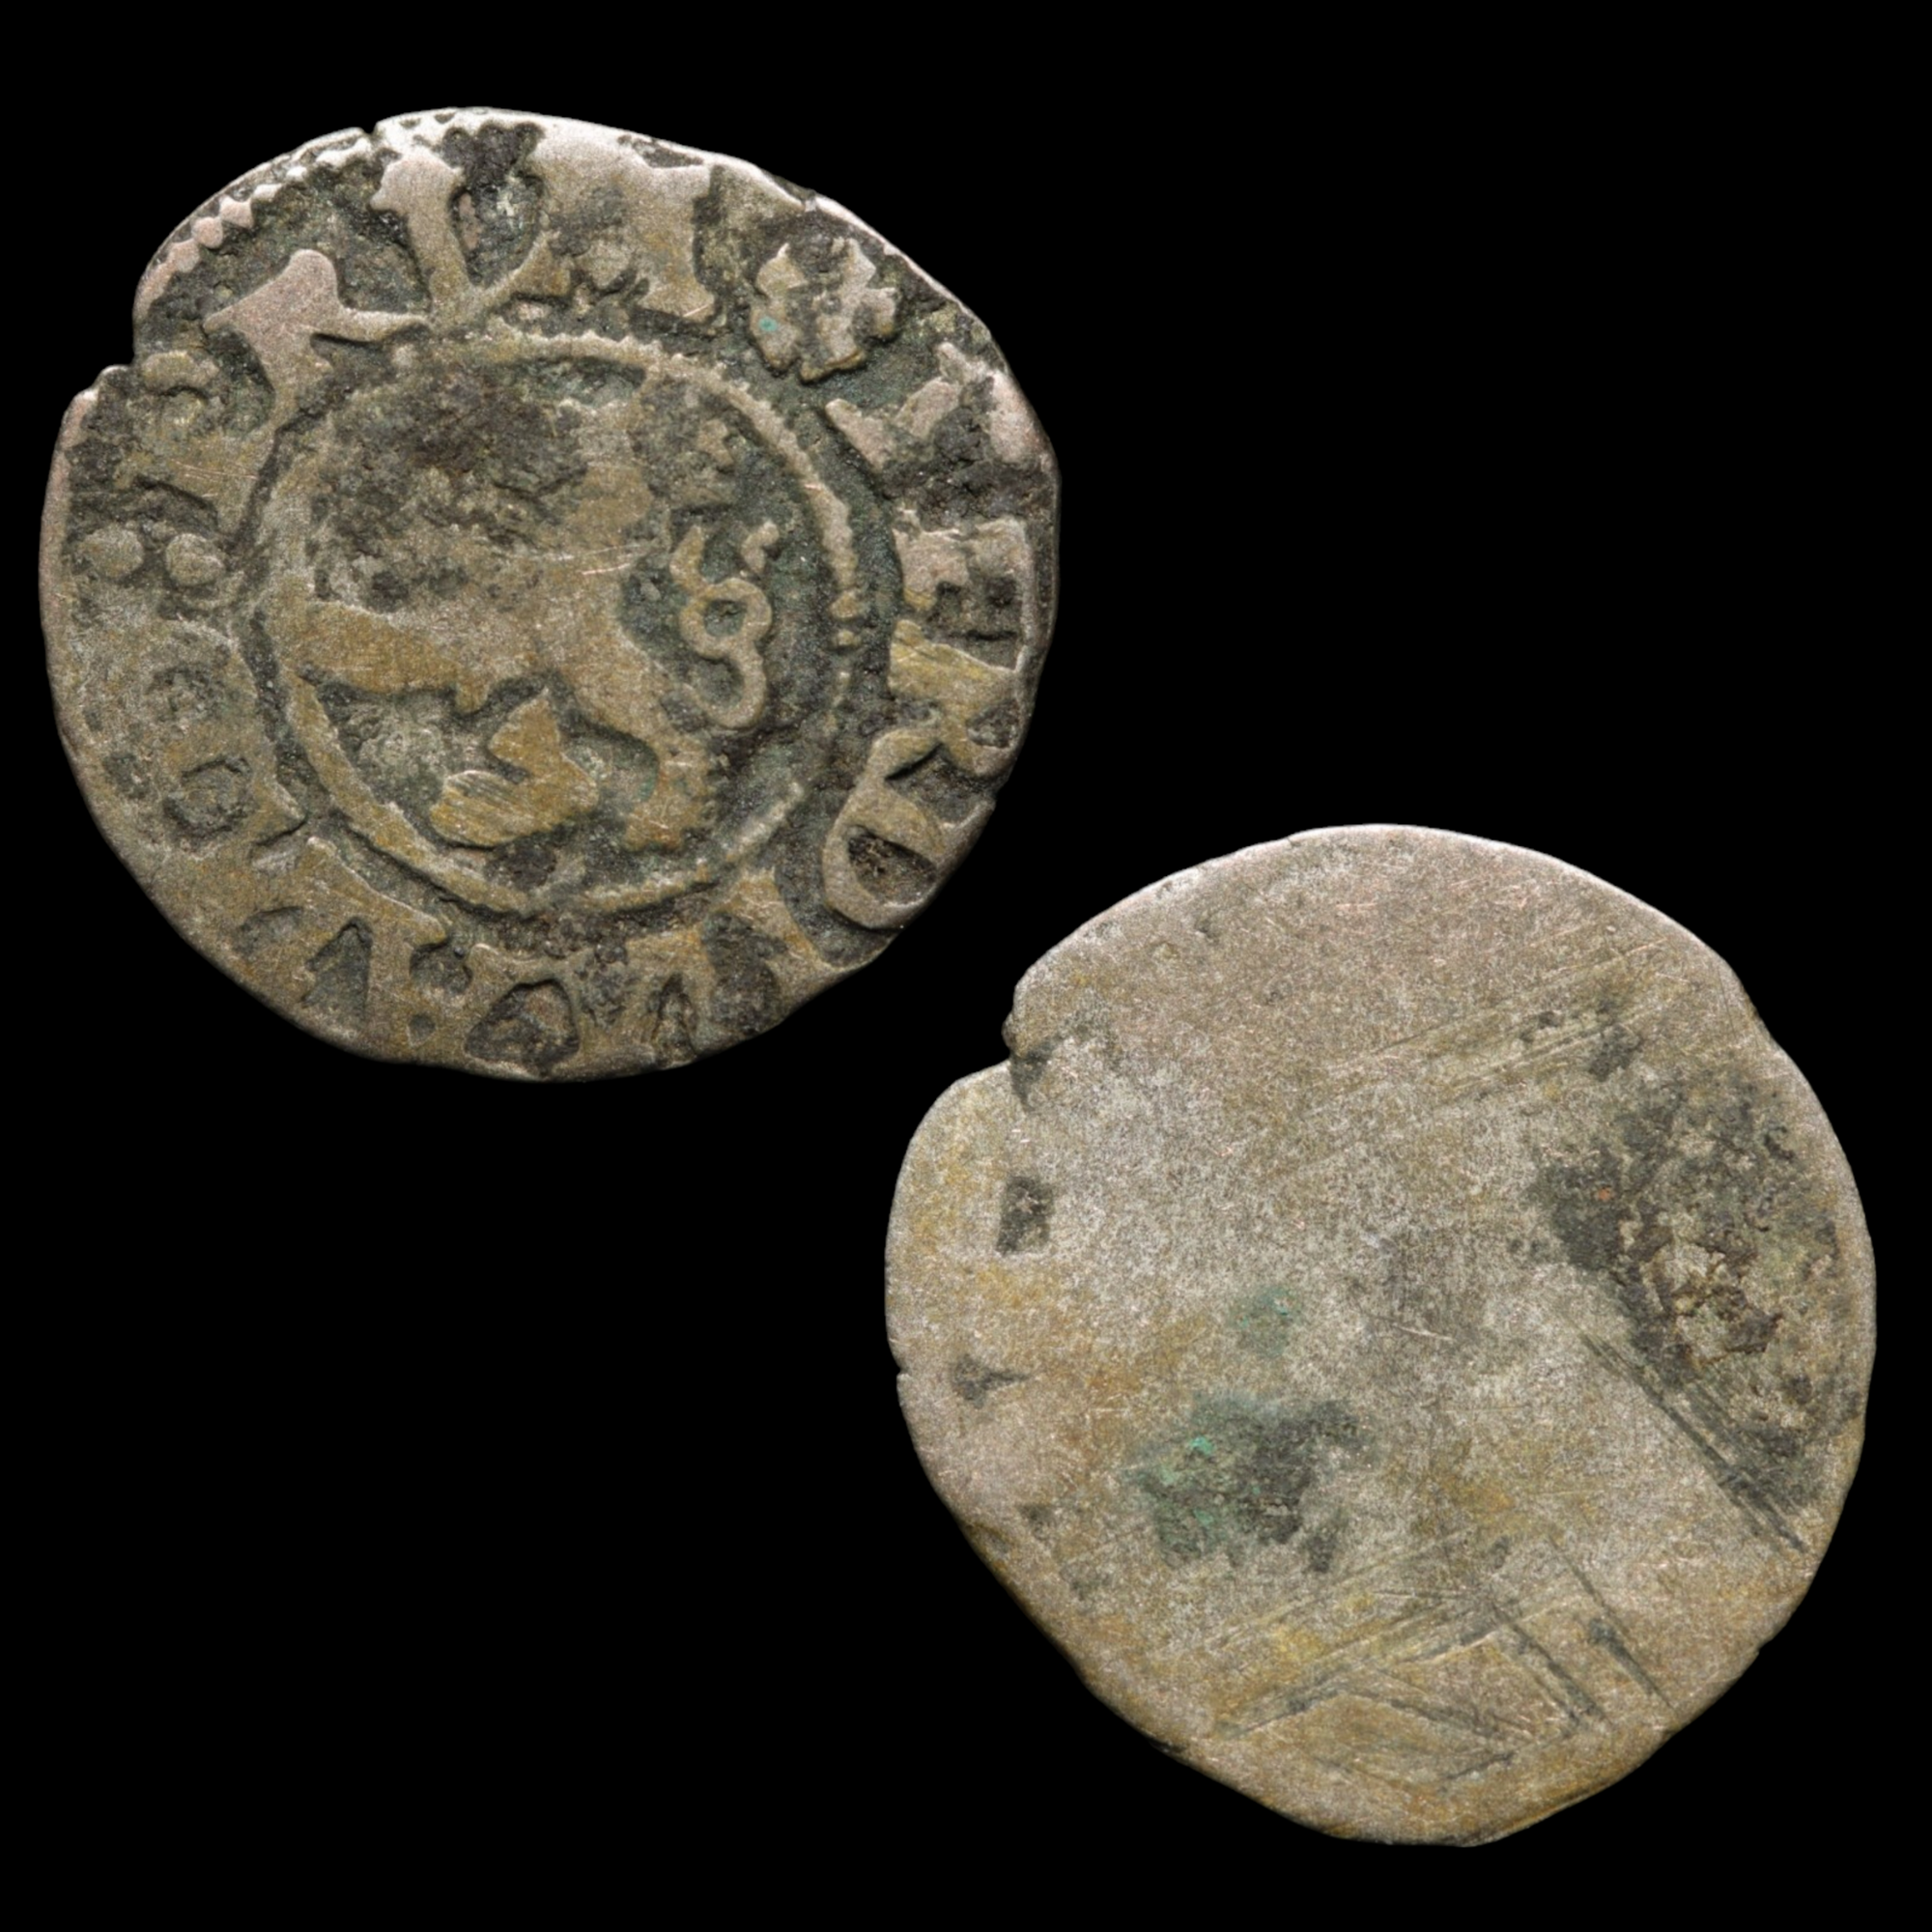 Kingdom of Bohemia, Ferdinand I, Weiss-Pfennig - 1526 to 1532 CE - Central Europe - 10/19/23 Auction